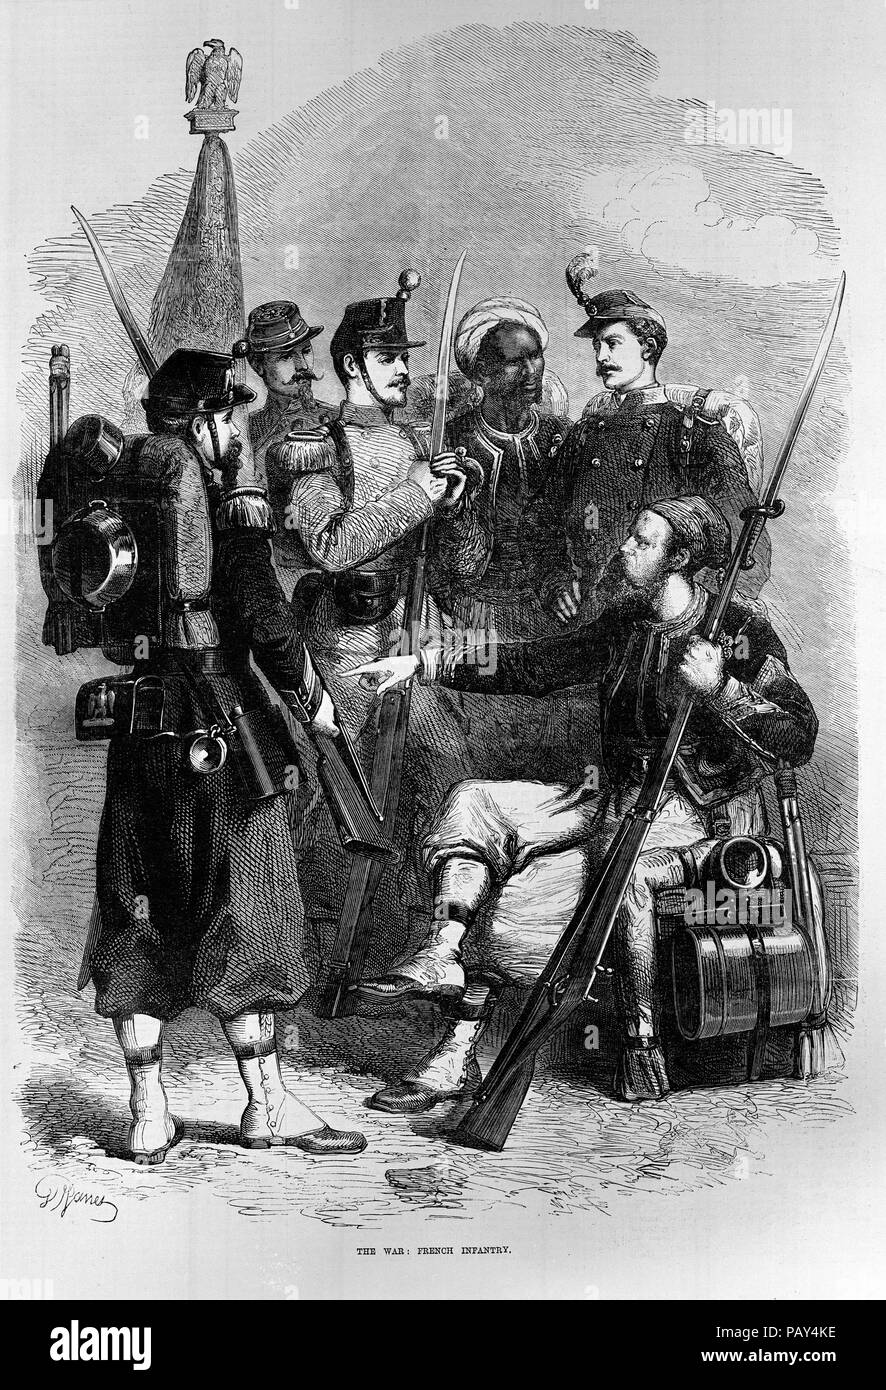 Engraving entitled French infantry from the Franco-Prussian War. From The Illustrated London News (3rd September 1870), pg. 236 Stock Photo